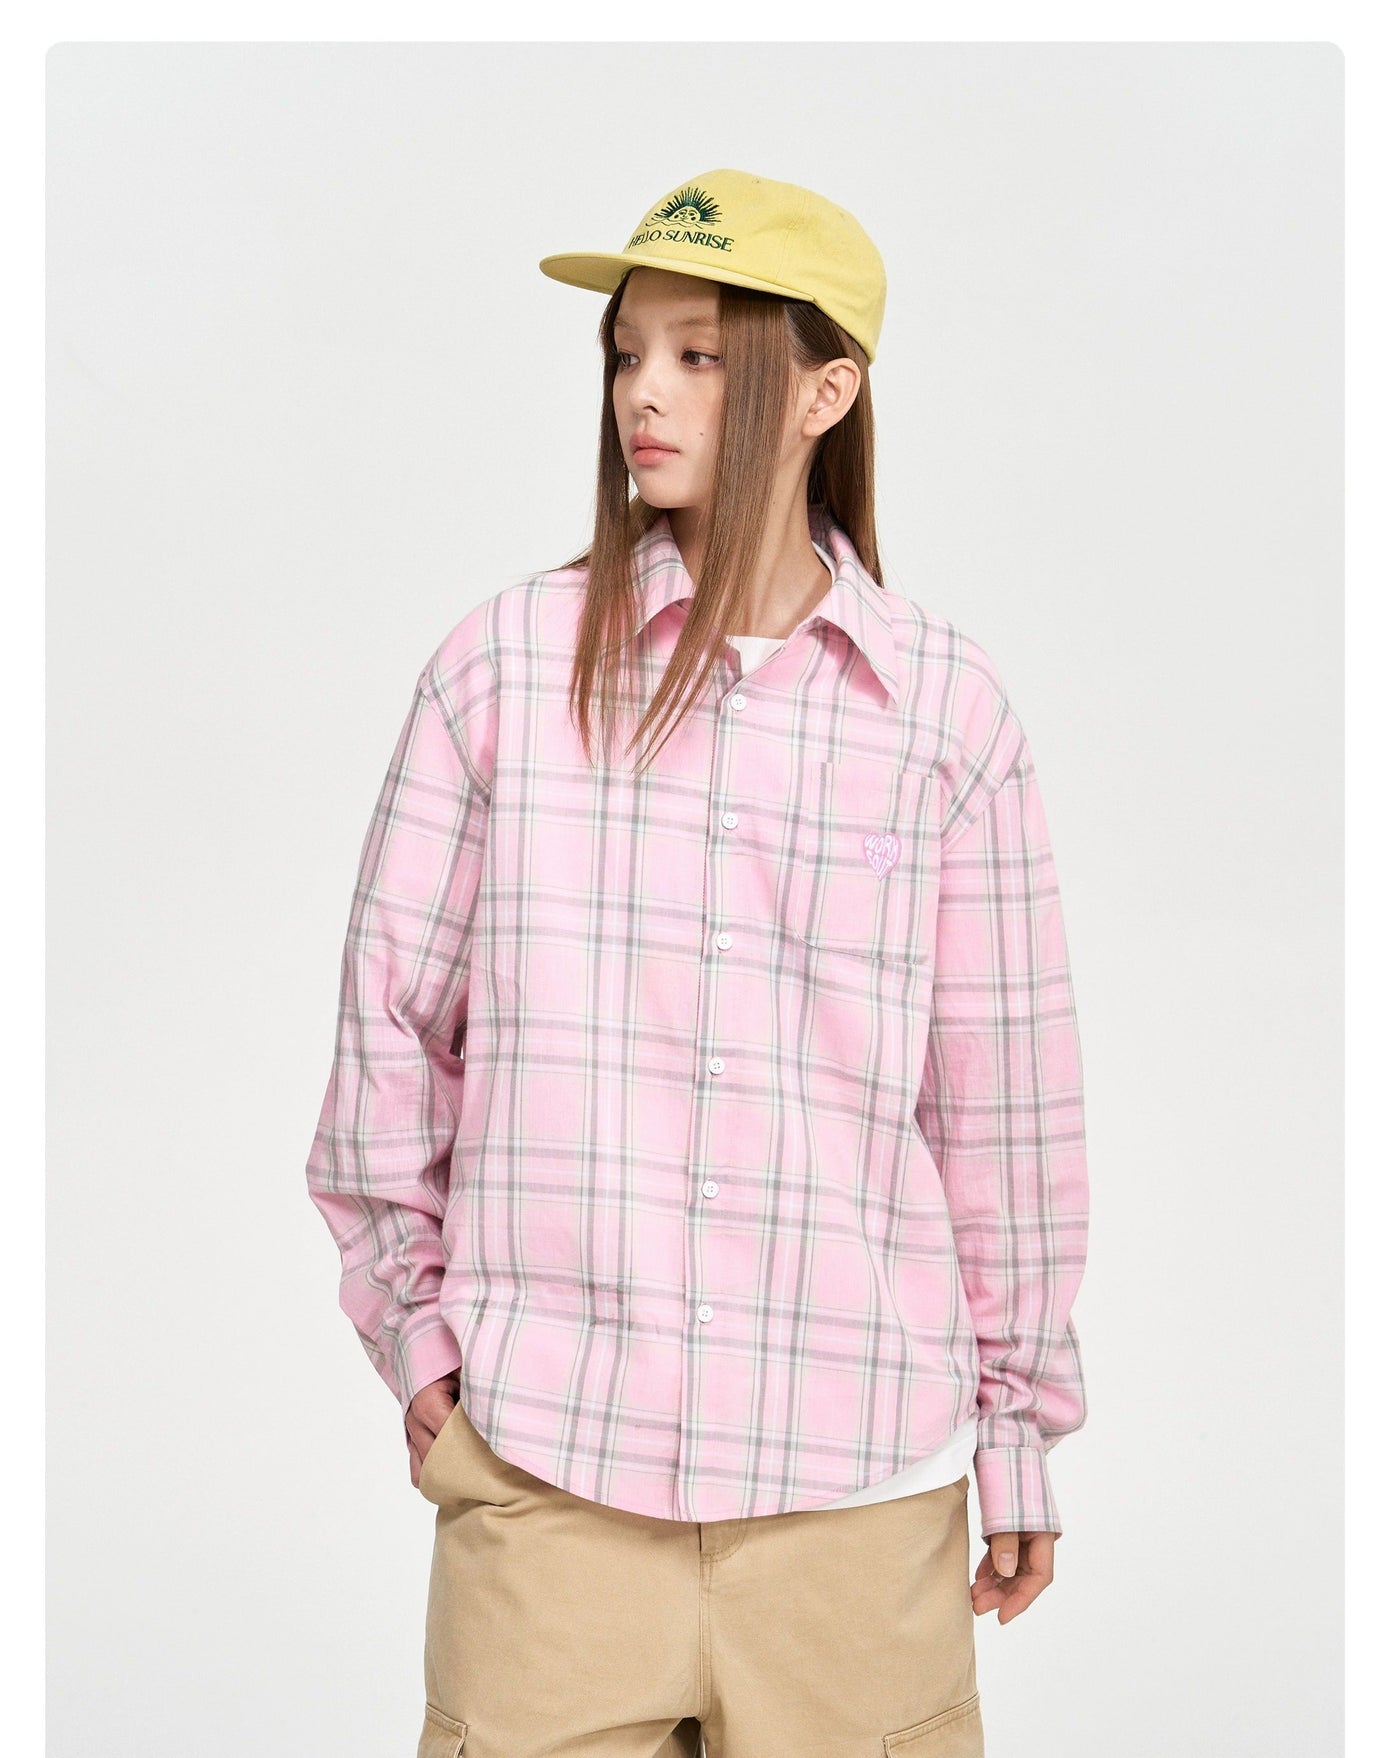 Plaid Style Basic Shirt Korean Street Fashion Shirt By WORKSOUT Shop Online at OH Vault